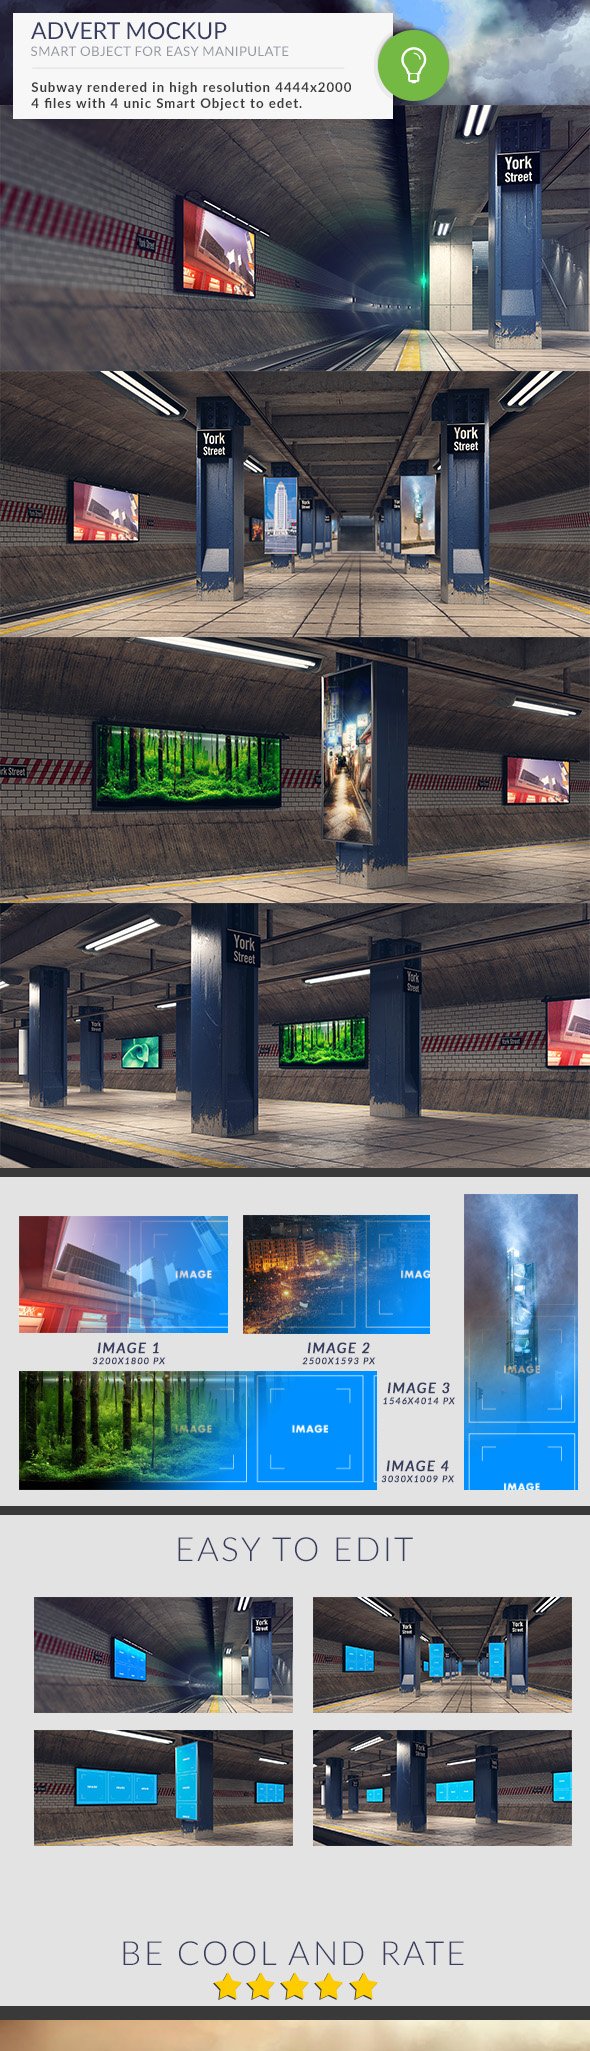 Subway Station Mockups Adverts preview image.